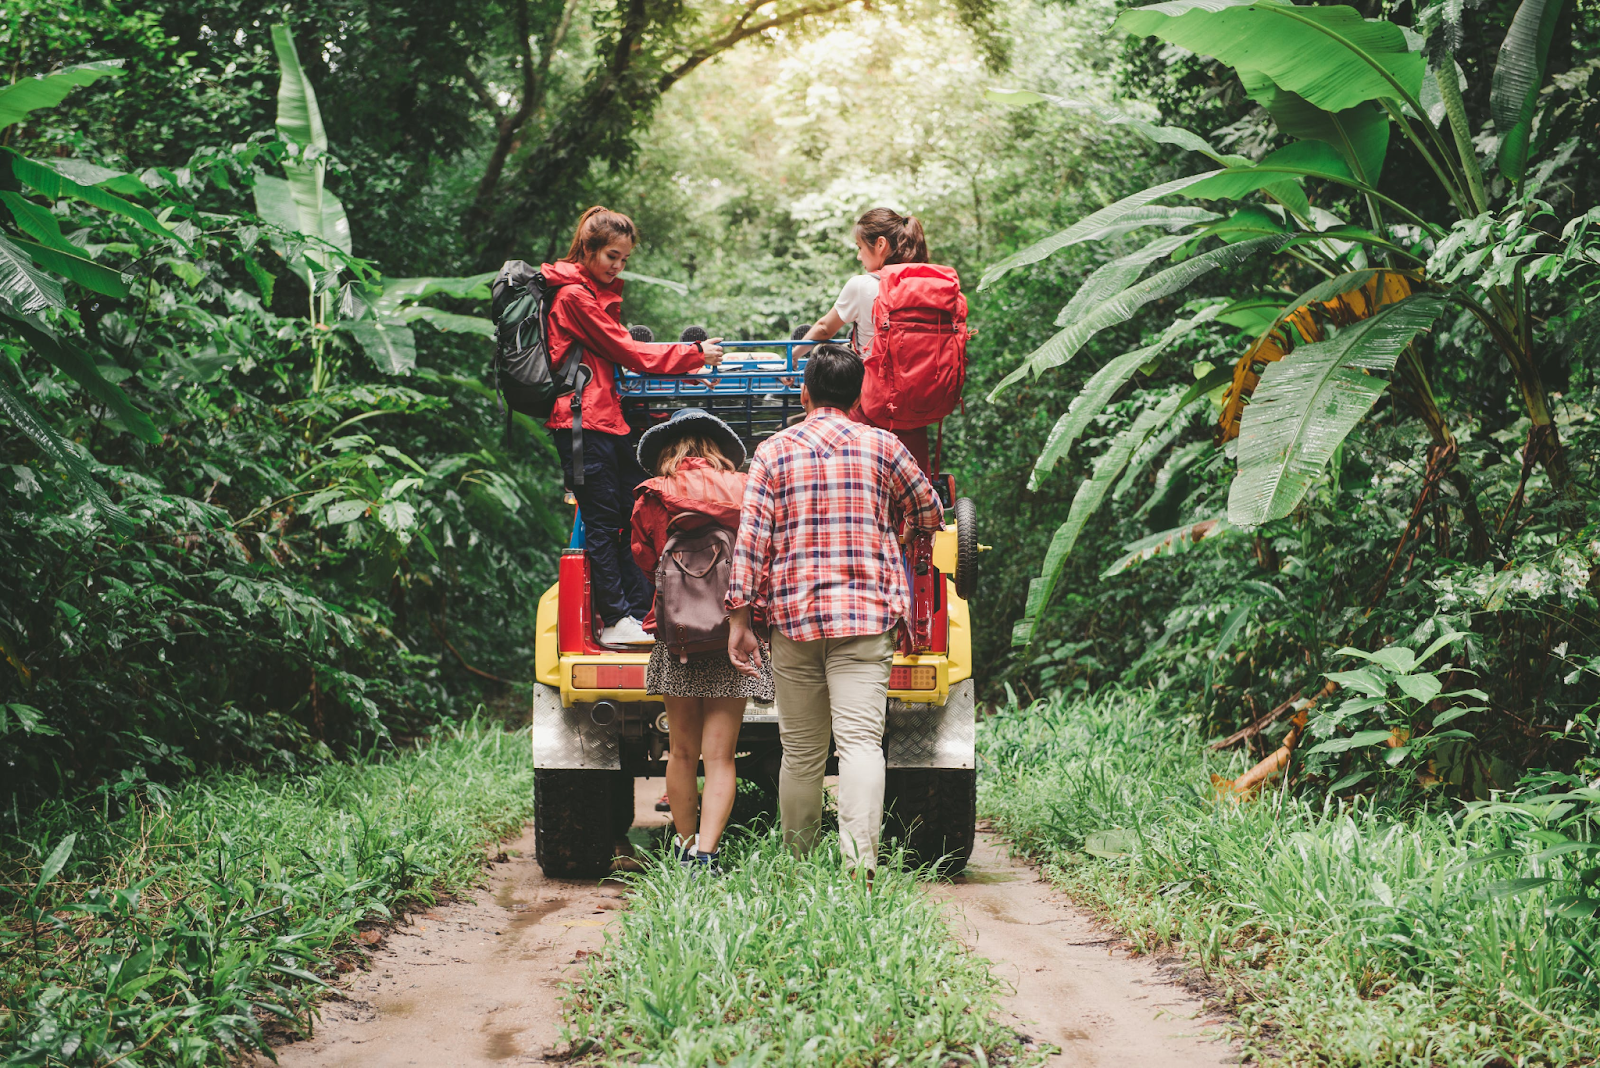 Planning a Family Road Trip? Here Are Some Helpful Tips 2